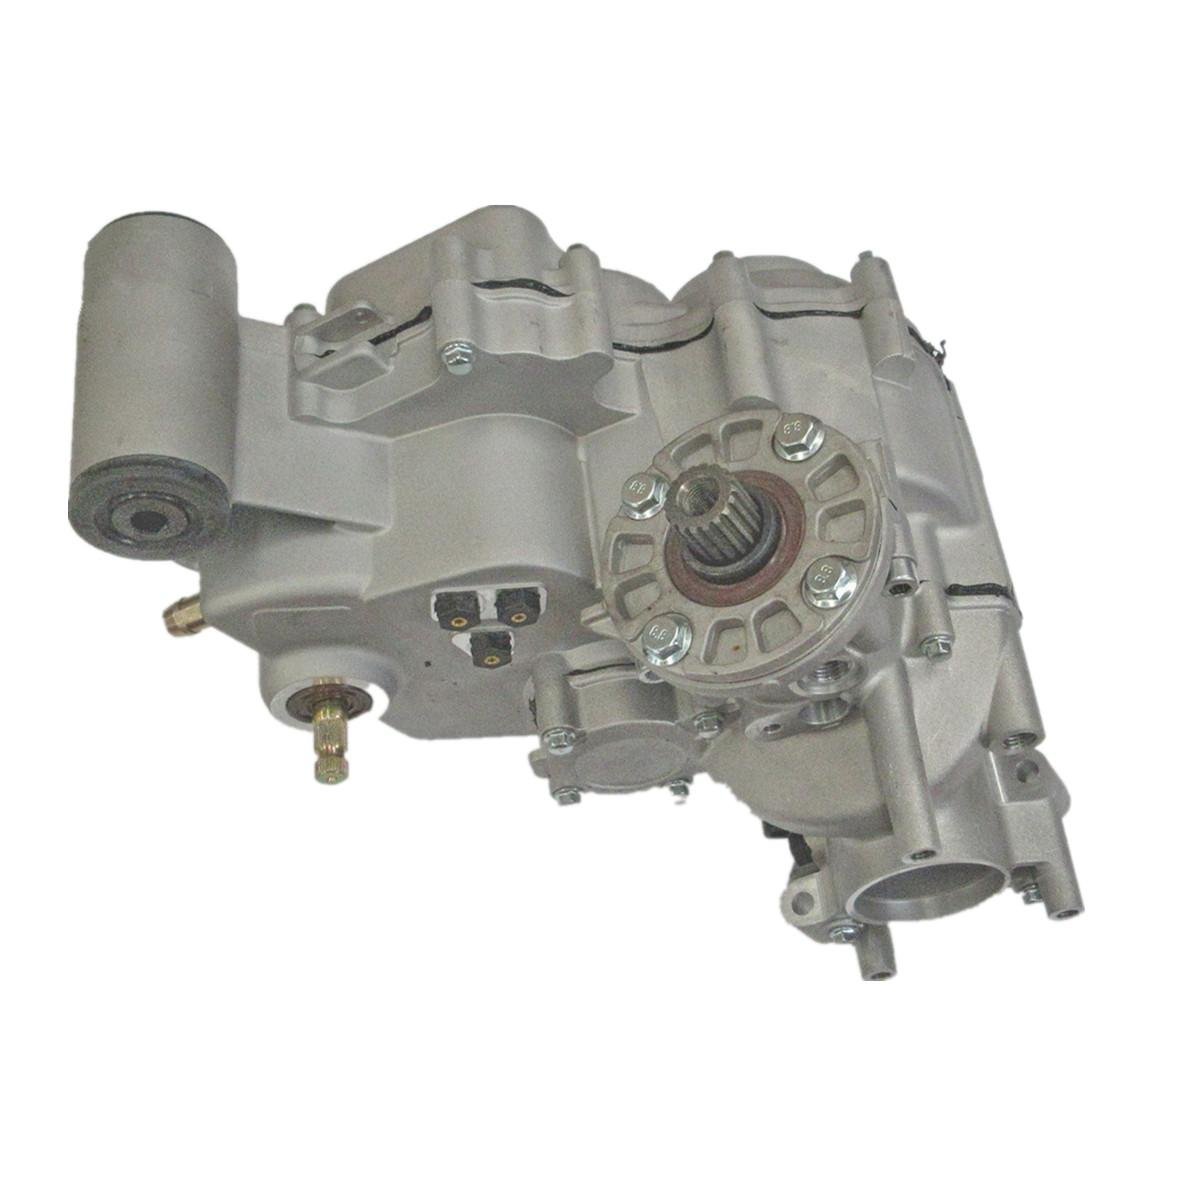 Can-am BRP 800 gearbox 4